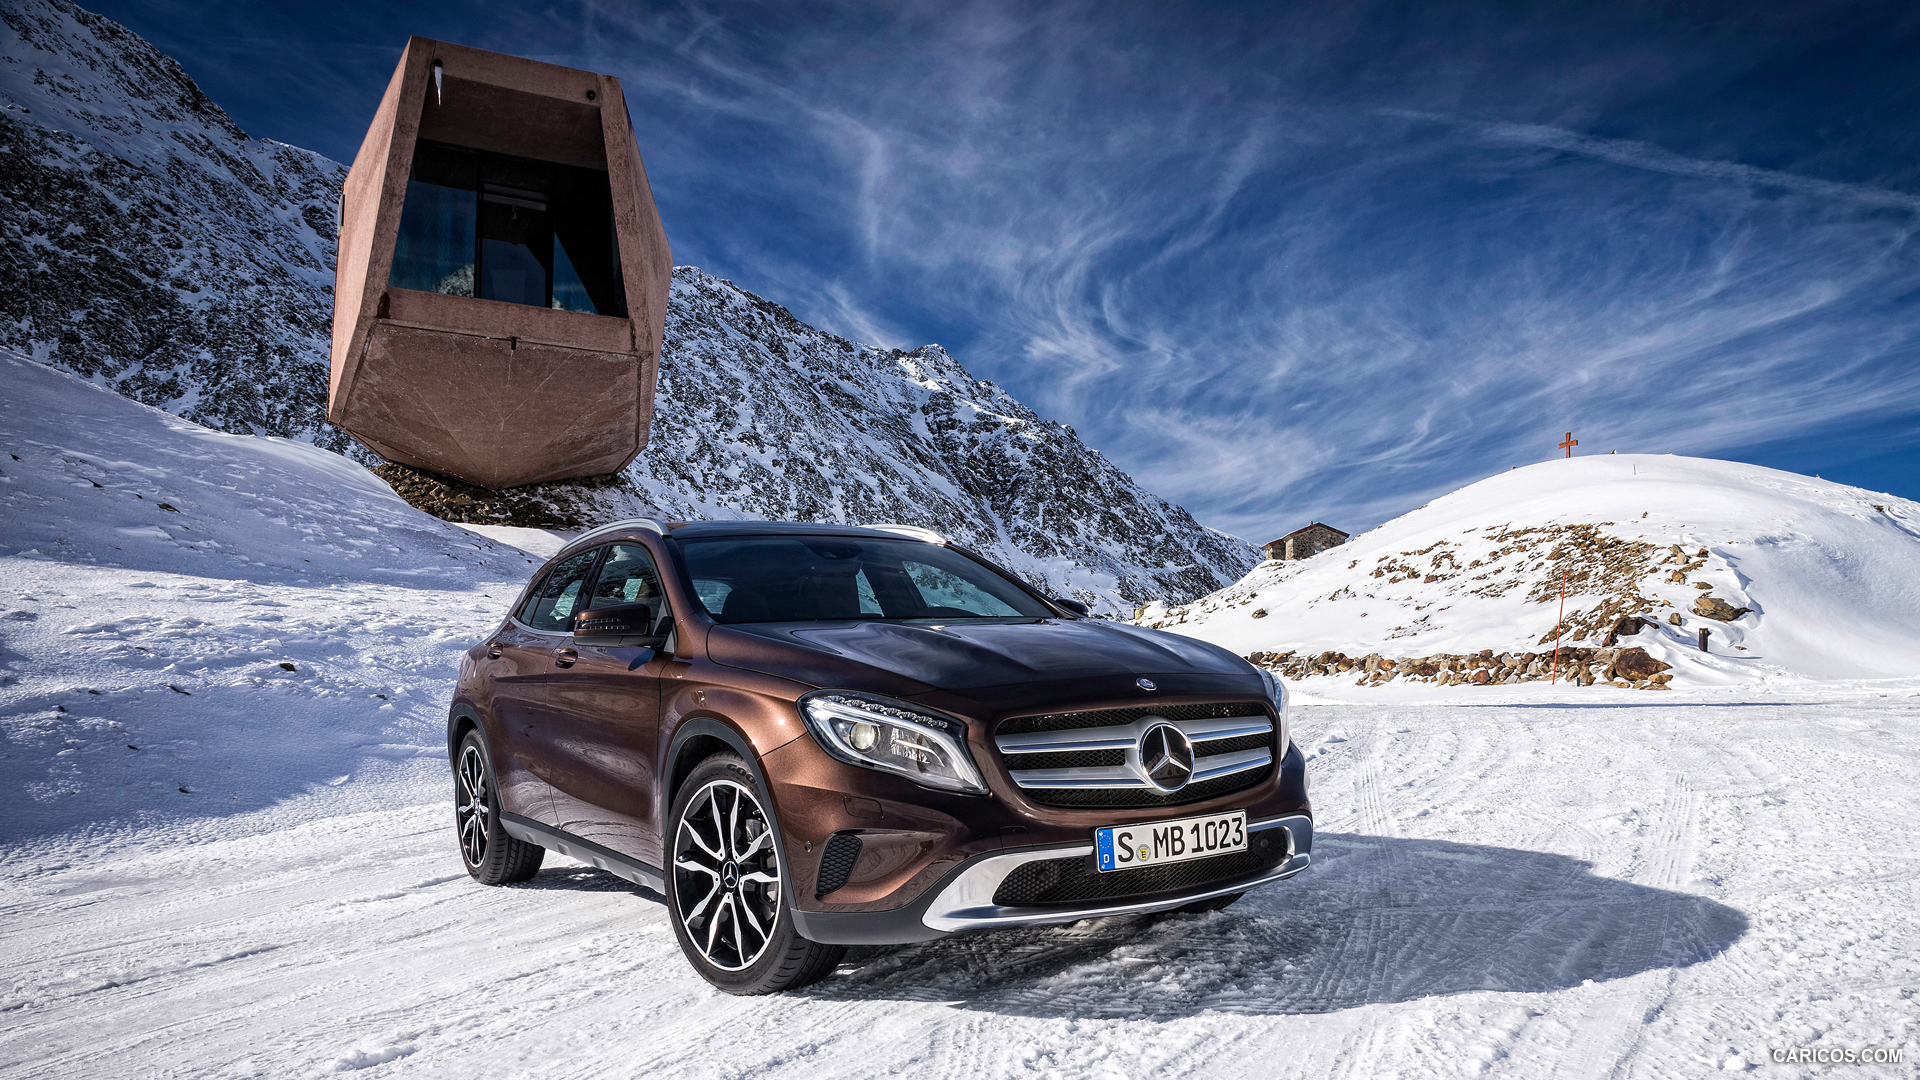 2015 Mercedes-Benz GLA 220 CDI 4MATIC - In Snow - Front, #62 of 71